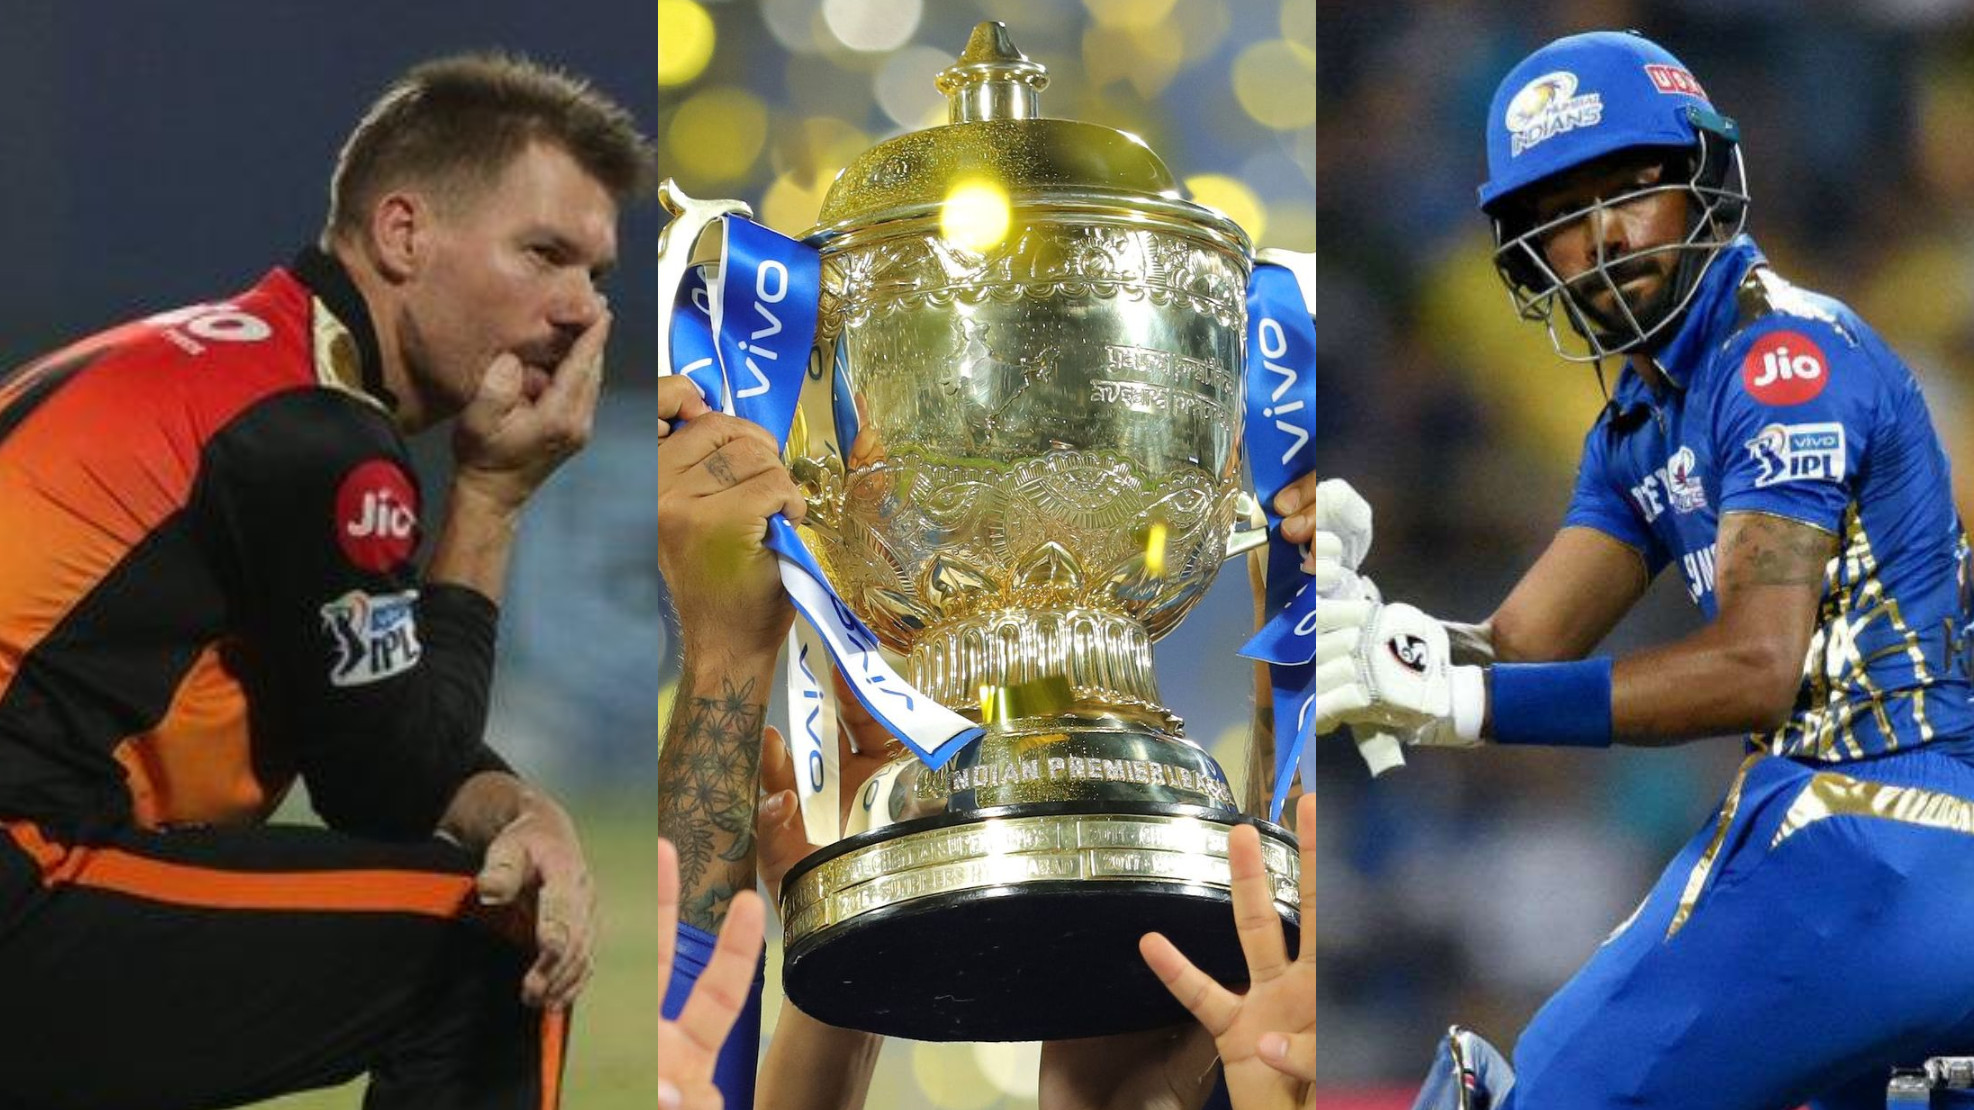 IPL 2021: 5 players who disappointed in the first half of IPL 14